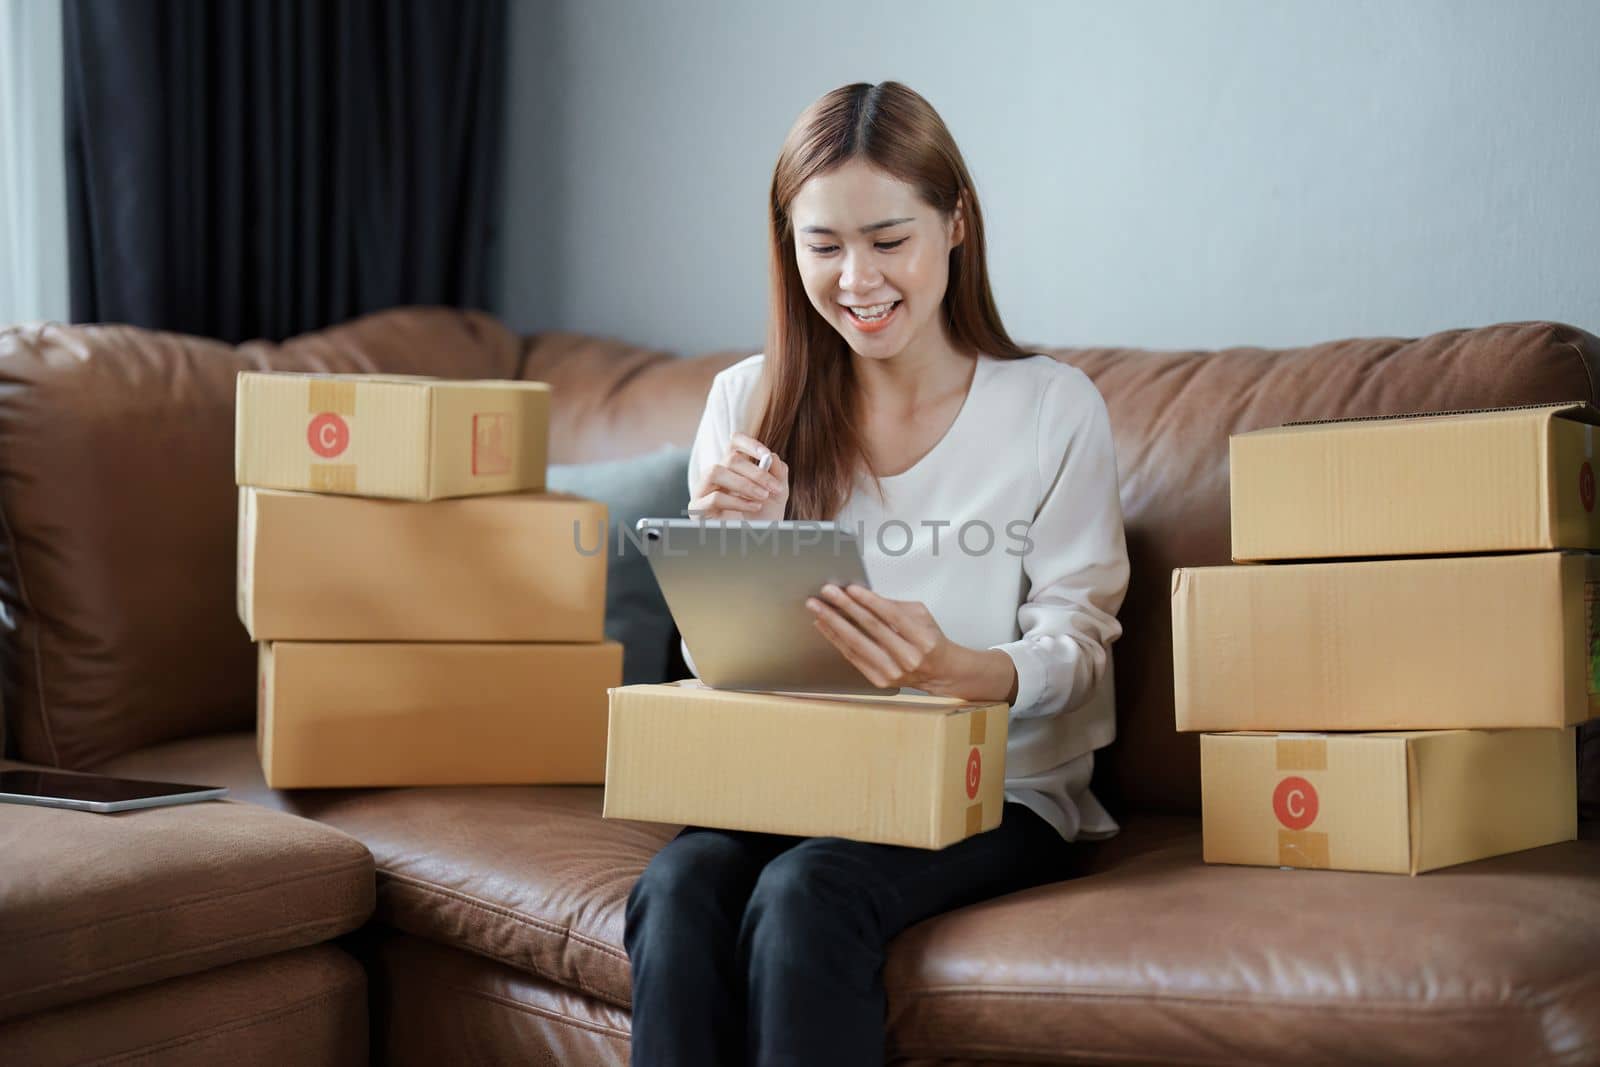 Starting small business entrepreneur of independent young Asian woman online seller is using tablet computer and taking orders to pack products for delivery to customers. SME delivery concept by Manastrong